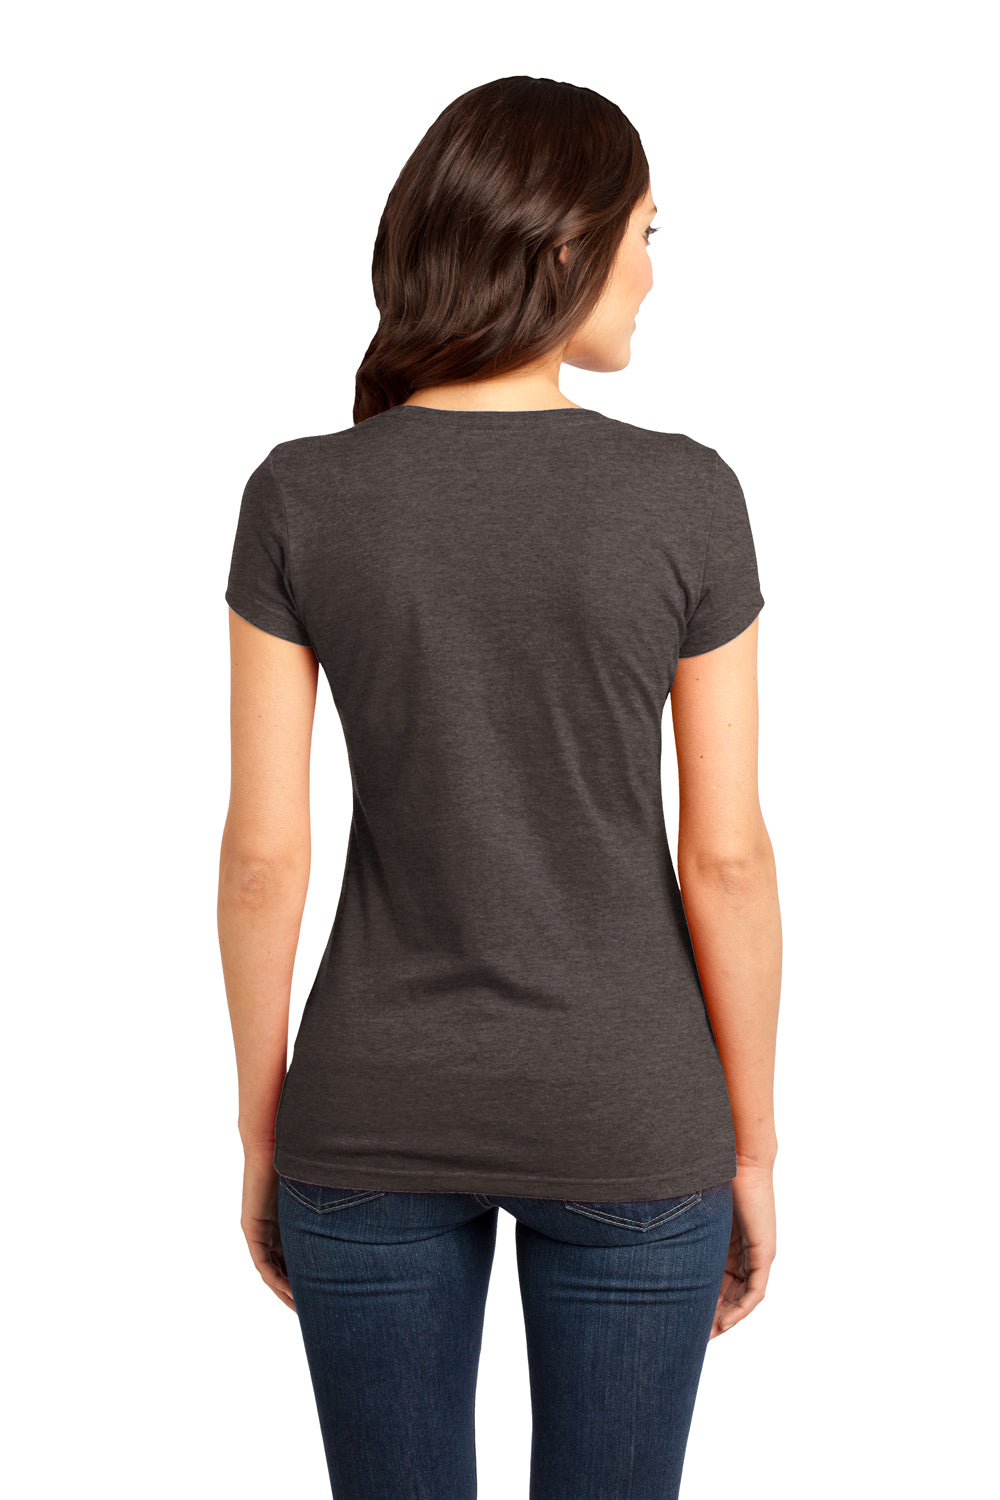 District DT6001 Womens Very Important Short Sleeve Crewneck T-Shirt Heather Brown Back